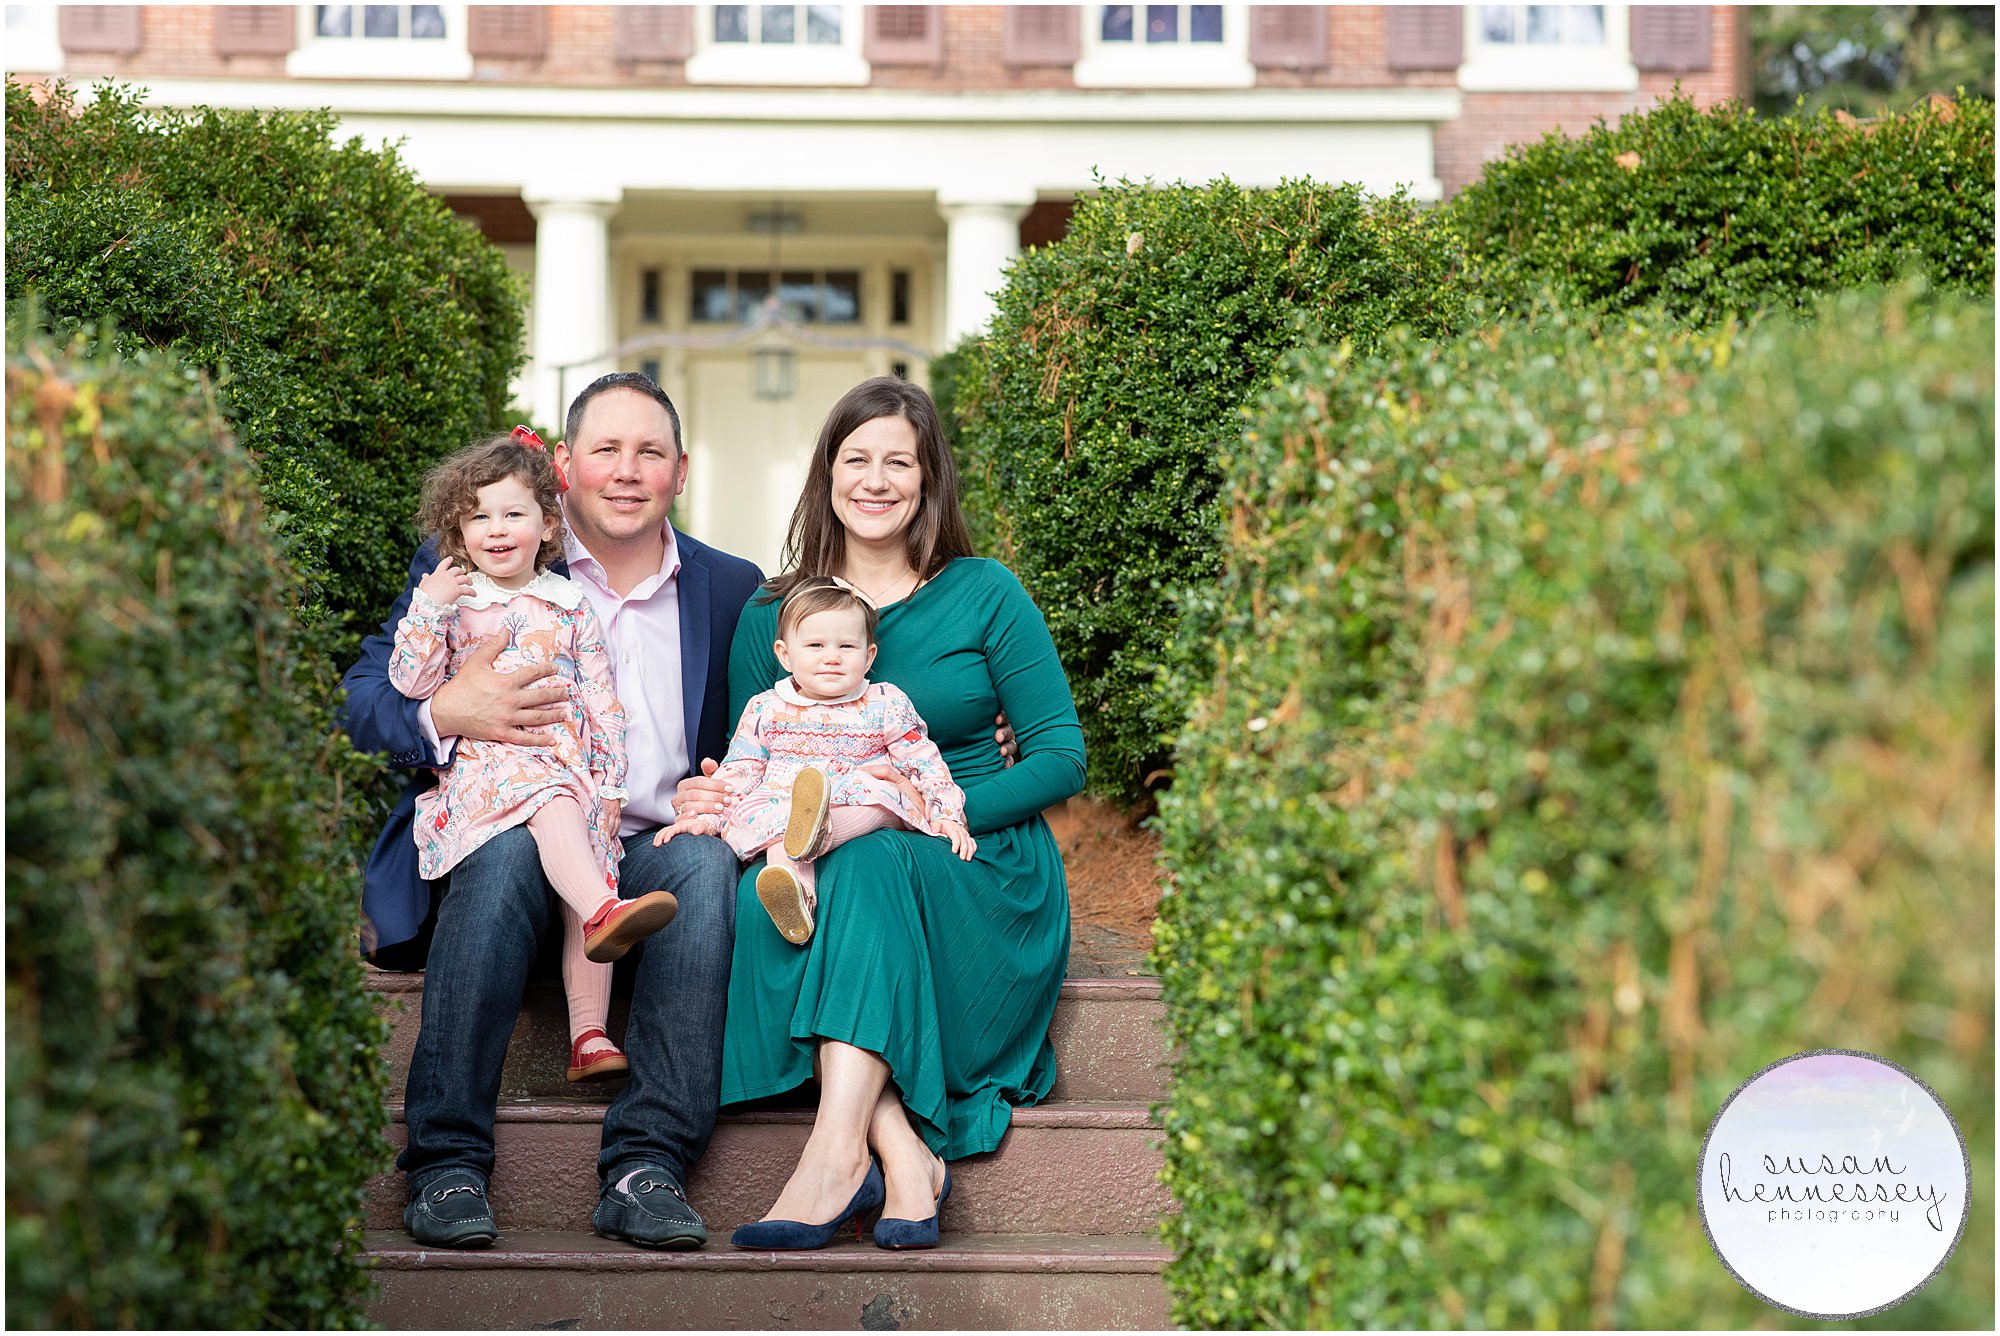 Smithville Mansion is the perfect location for your South Jersey holiday family photo session